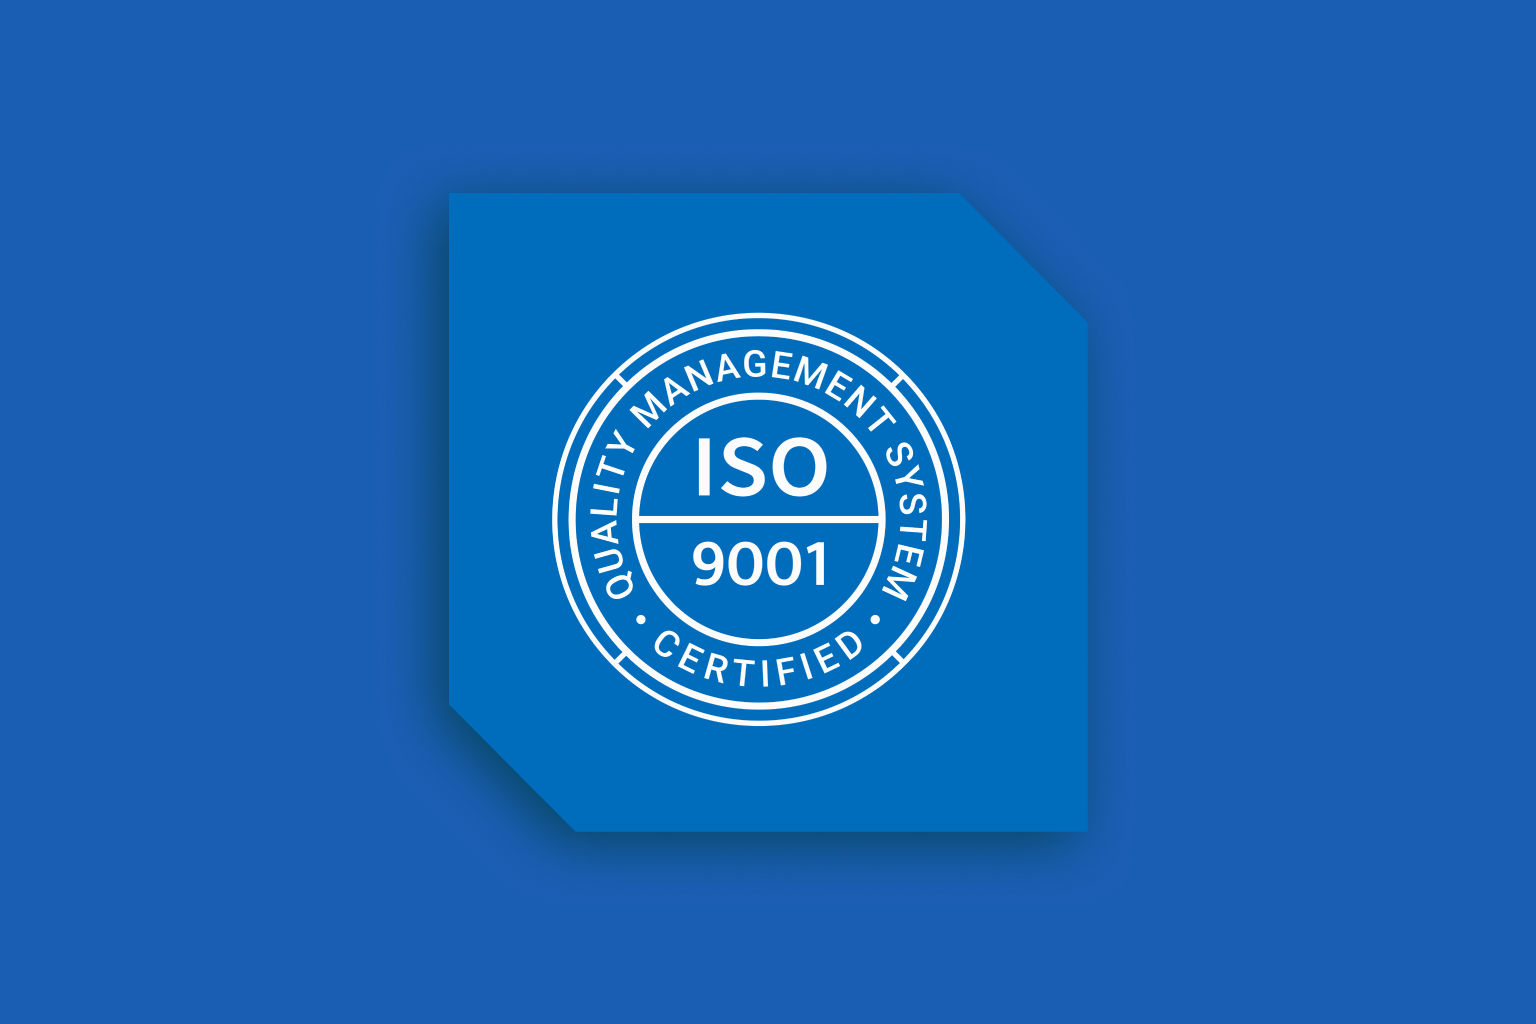 What we Learned by getting ISO 9001 Certified